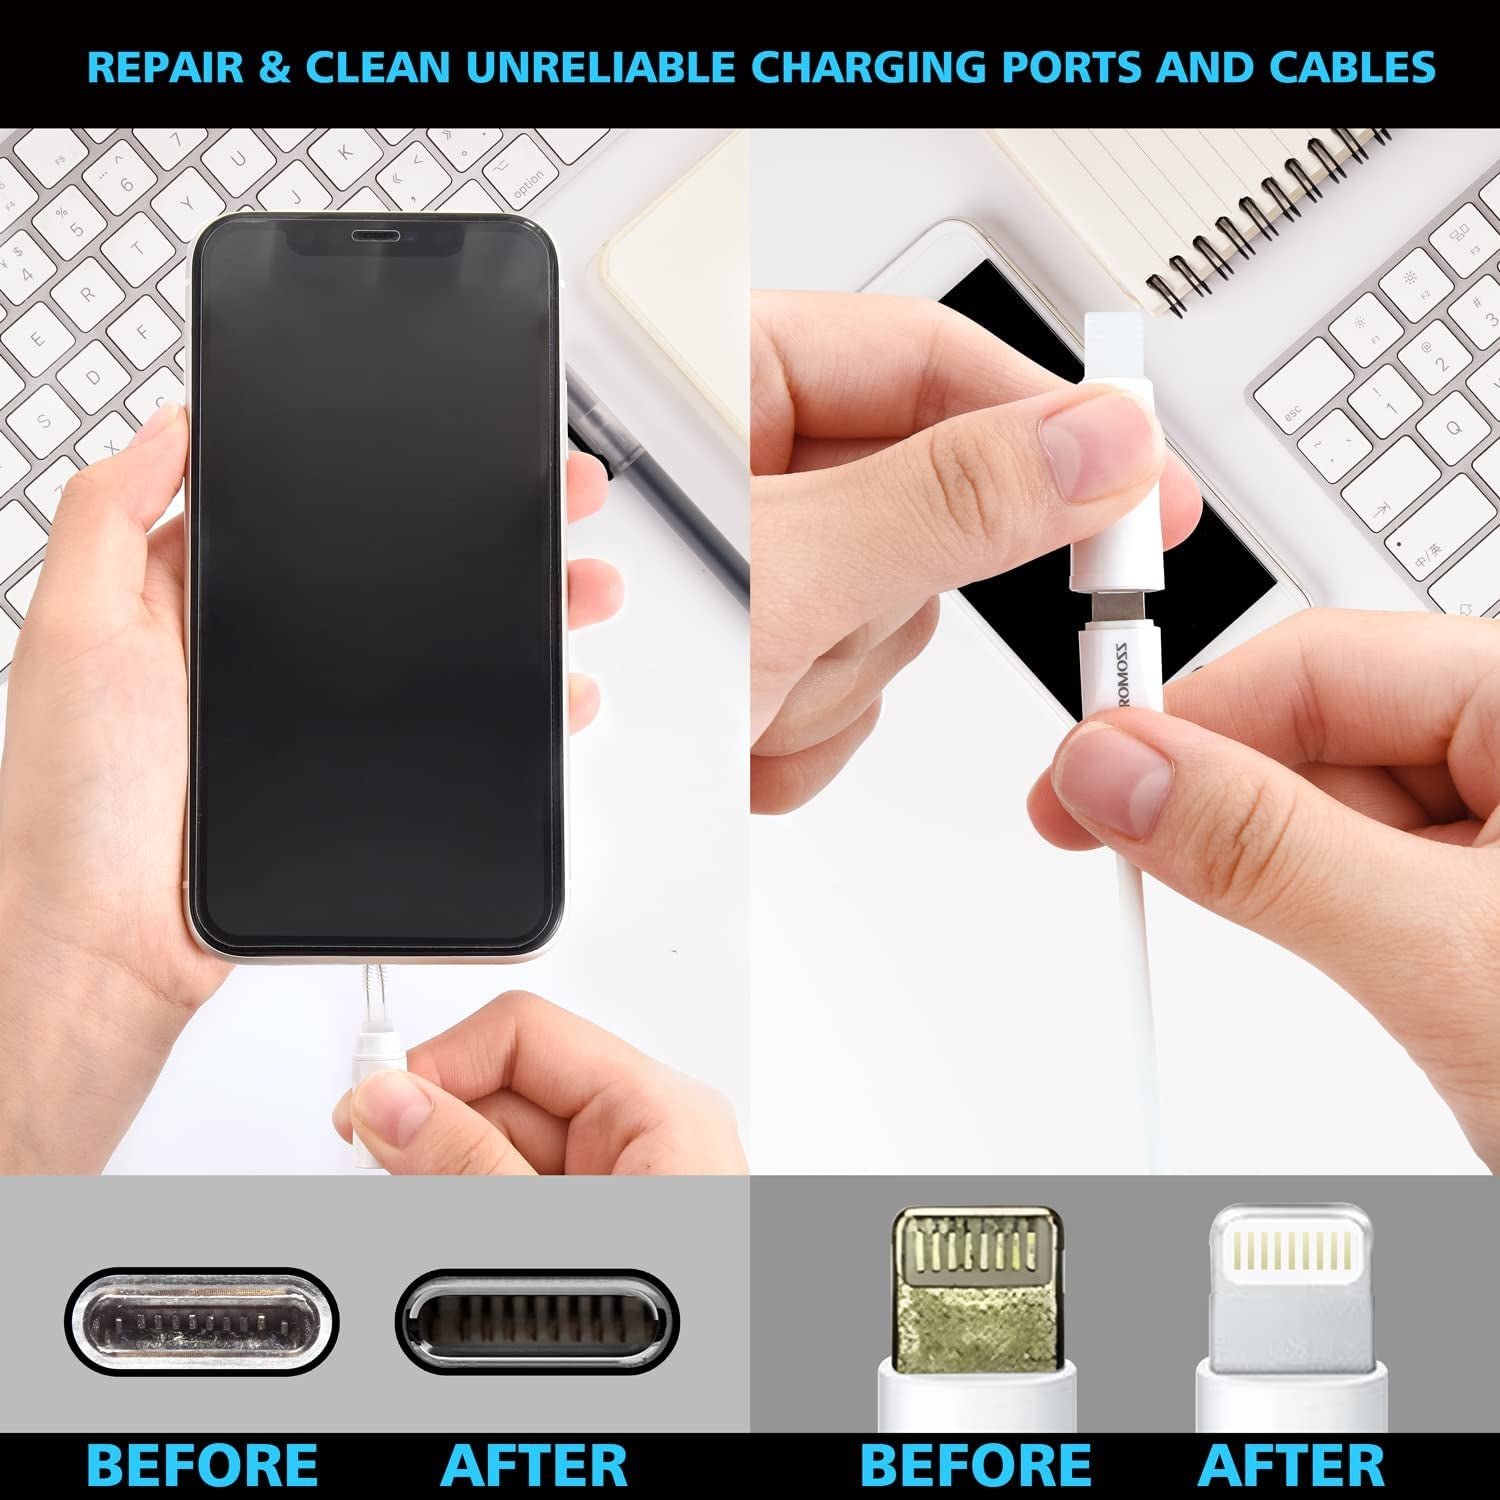 Cleaning Kit for Iphone, Multi-Tool Airpod Cleaner Kit, Cell Phone Cleaning Repair & Recovery Iphone and Ipad (Type C) Charging Port, Lightning Cables, and Connectors, Easy to Store and Carry（White